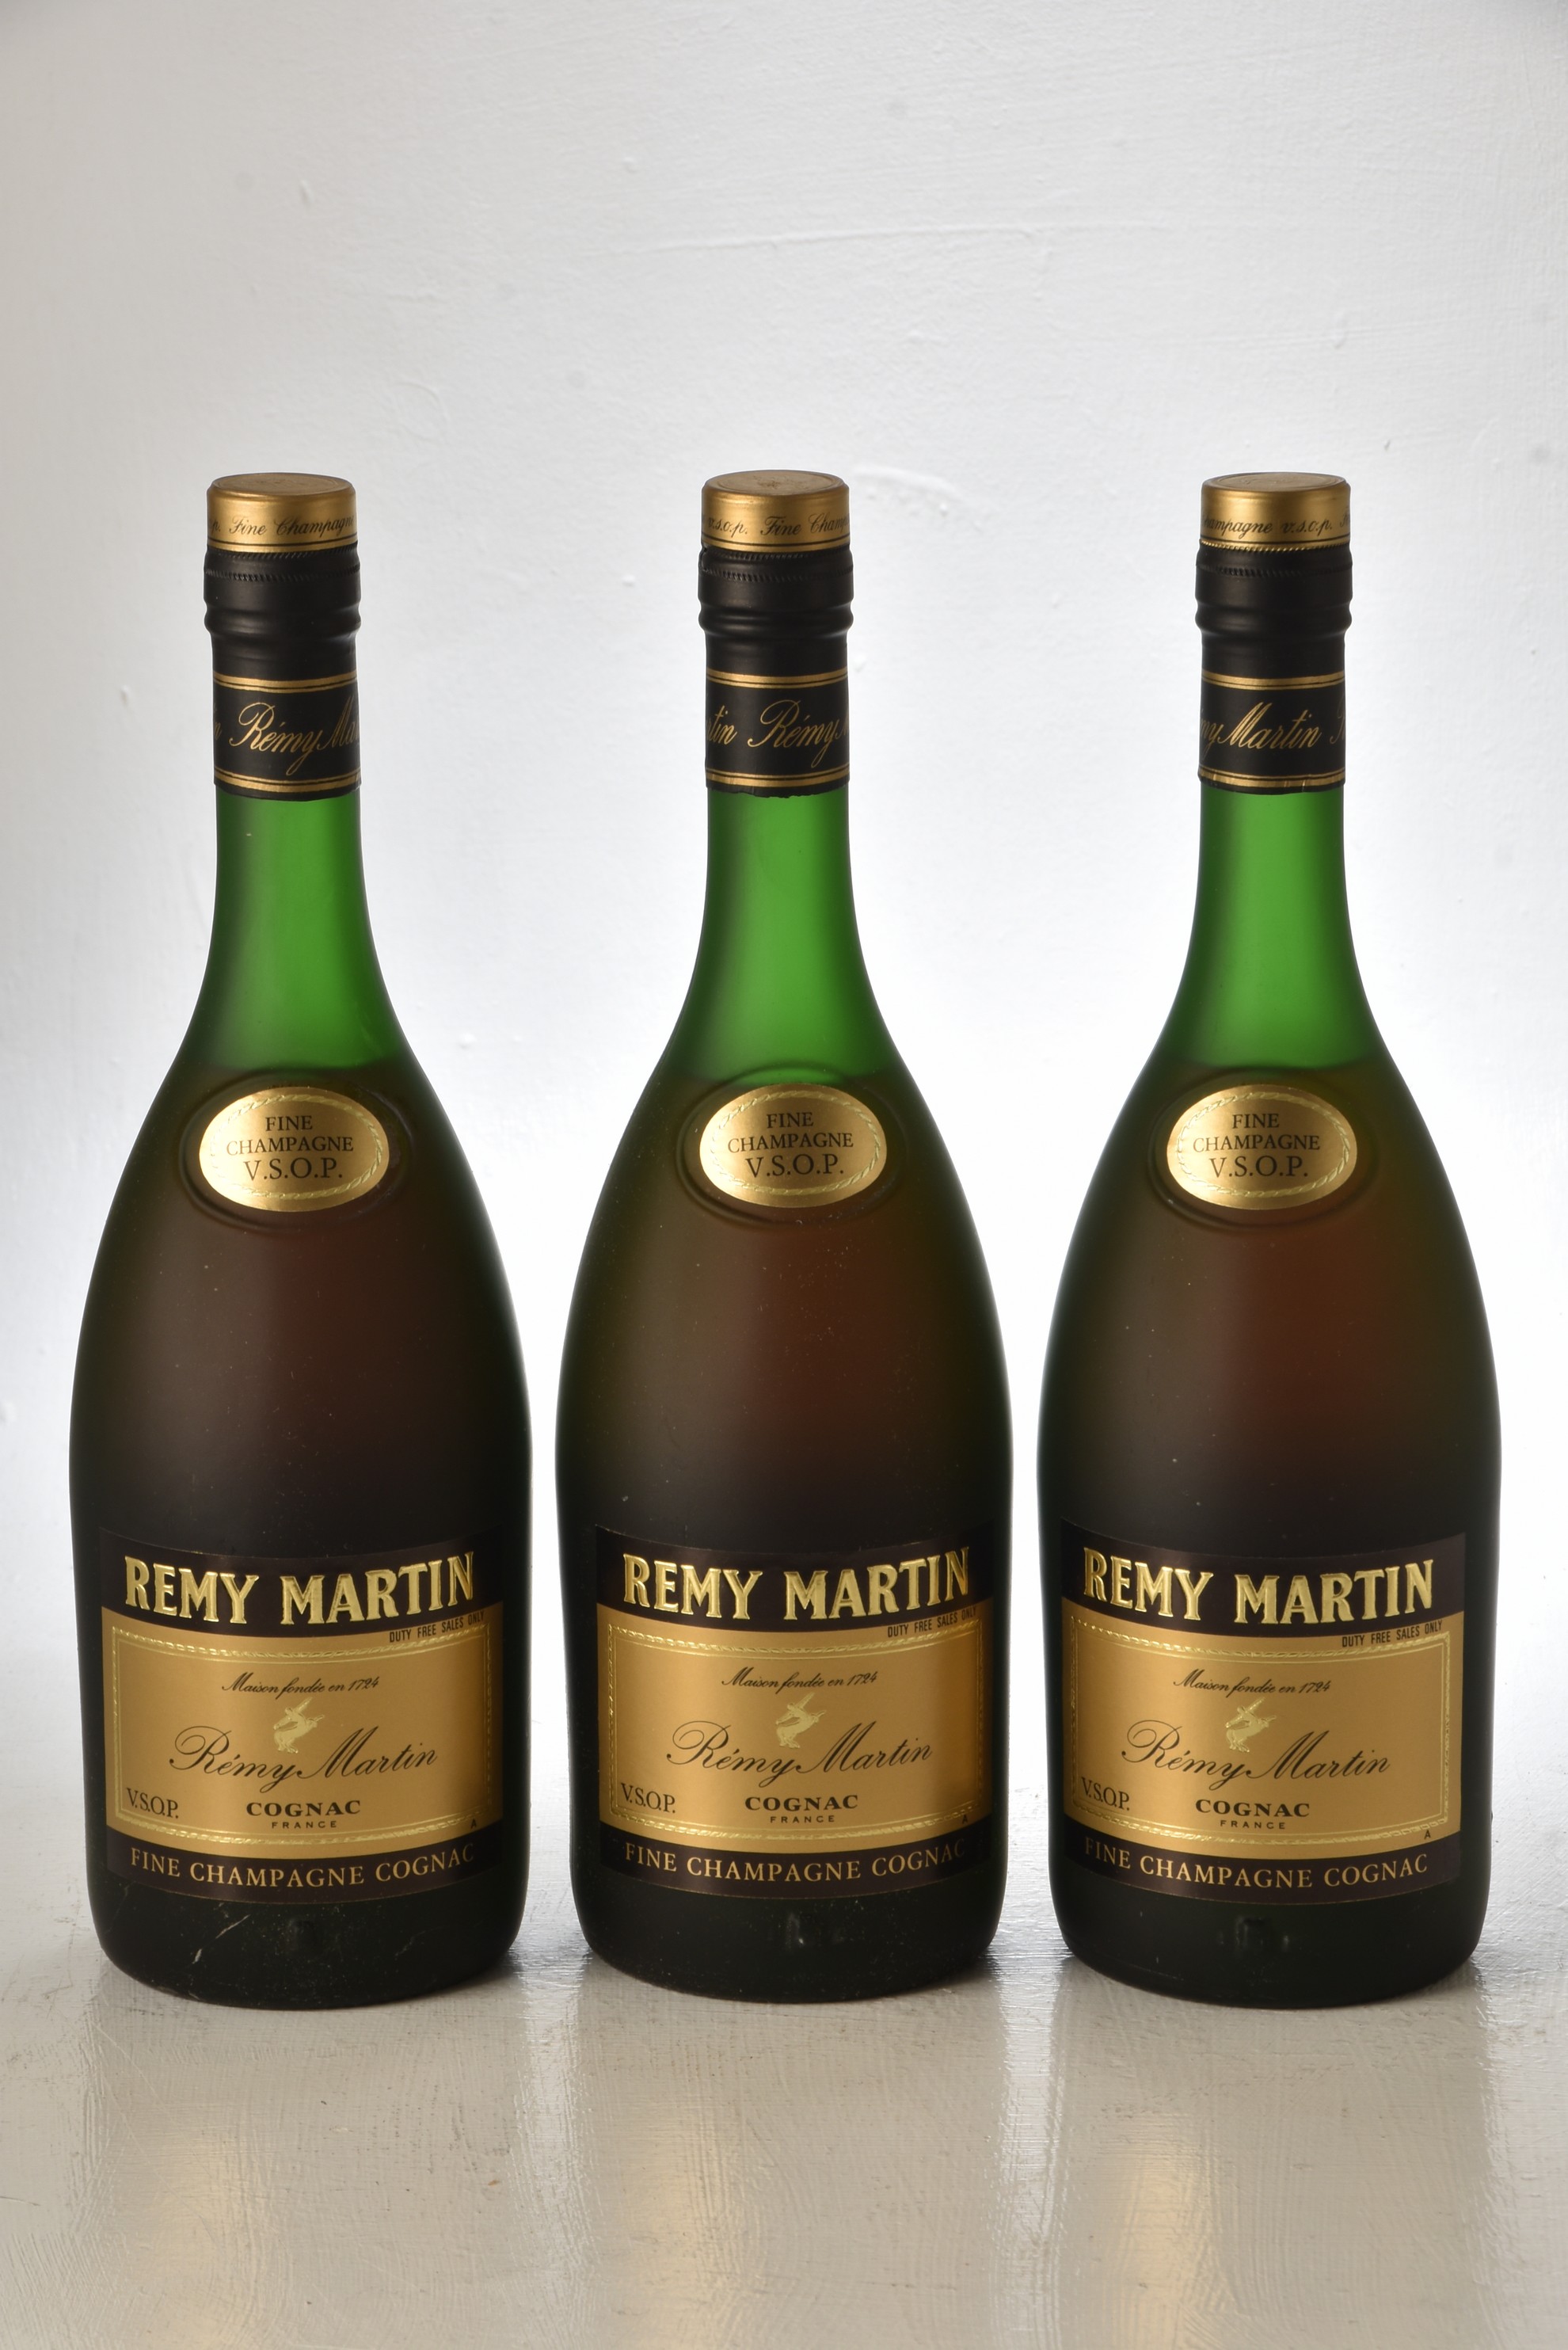 Remy Martin VSOP Champagne Cognac 3 bts No Size or Strength Stated in Original Remy Martin carton Be